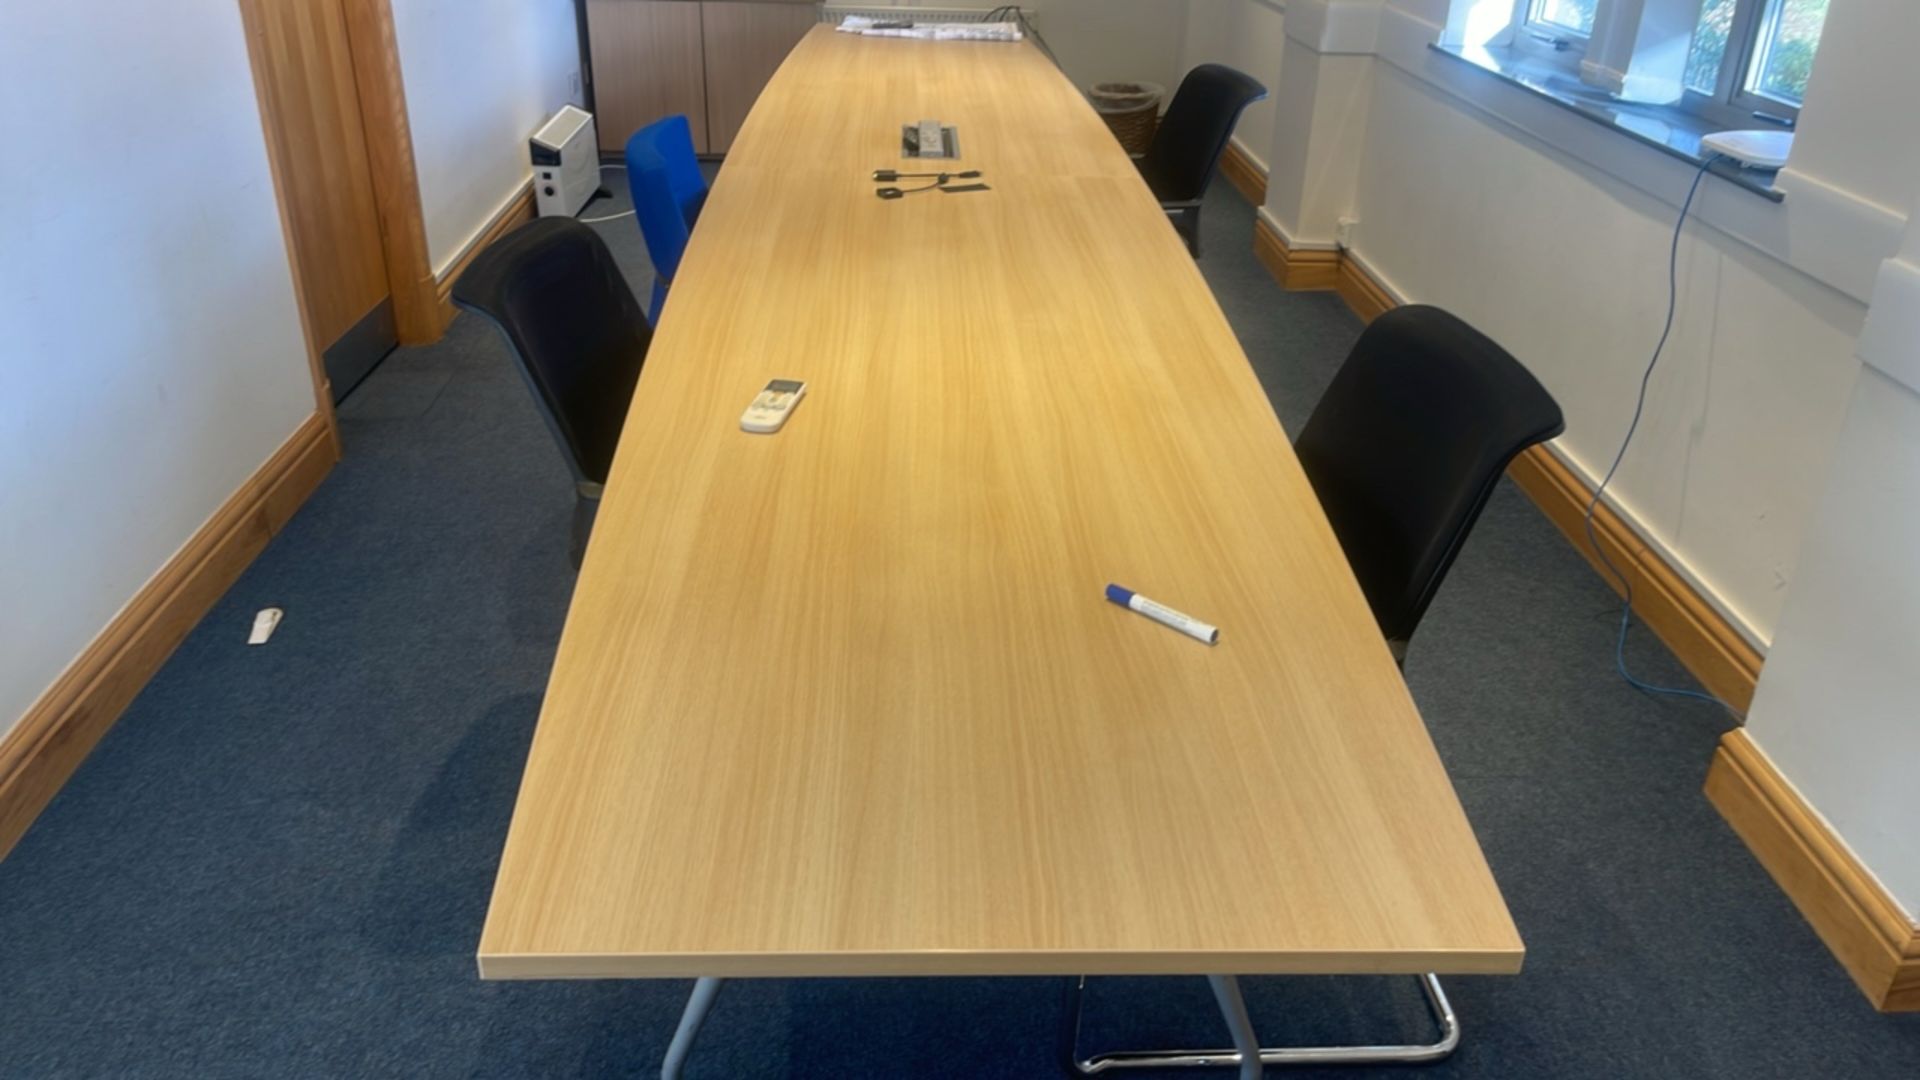 Contents Of Meeting Room - Image 4 of 8